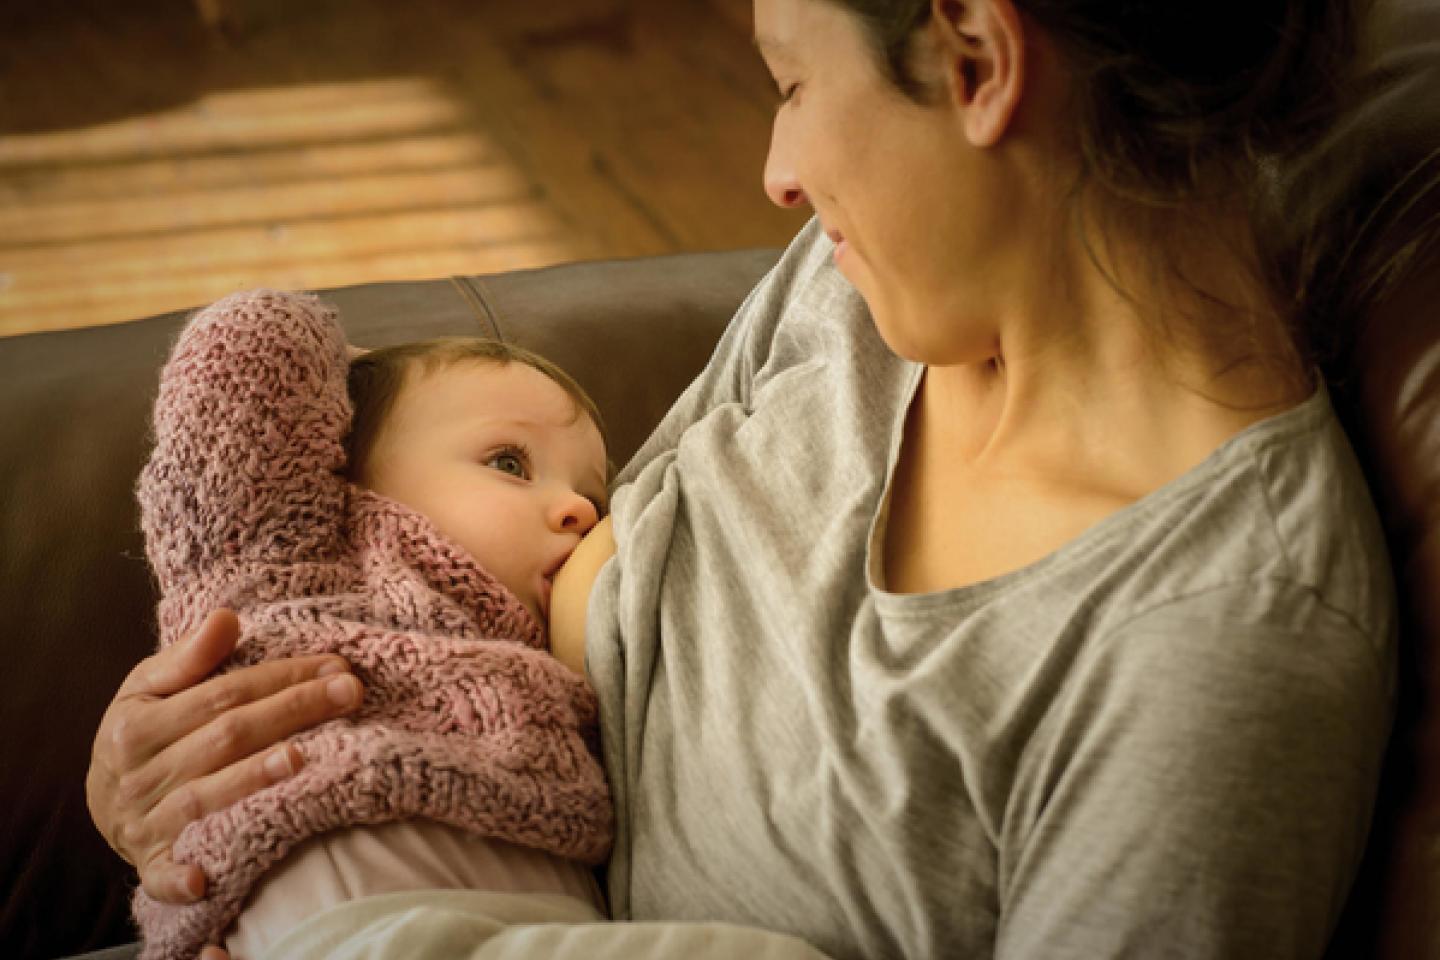 Can breastfeeding mothers take covid vaccine